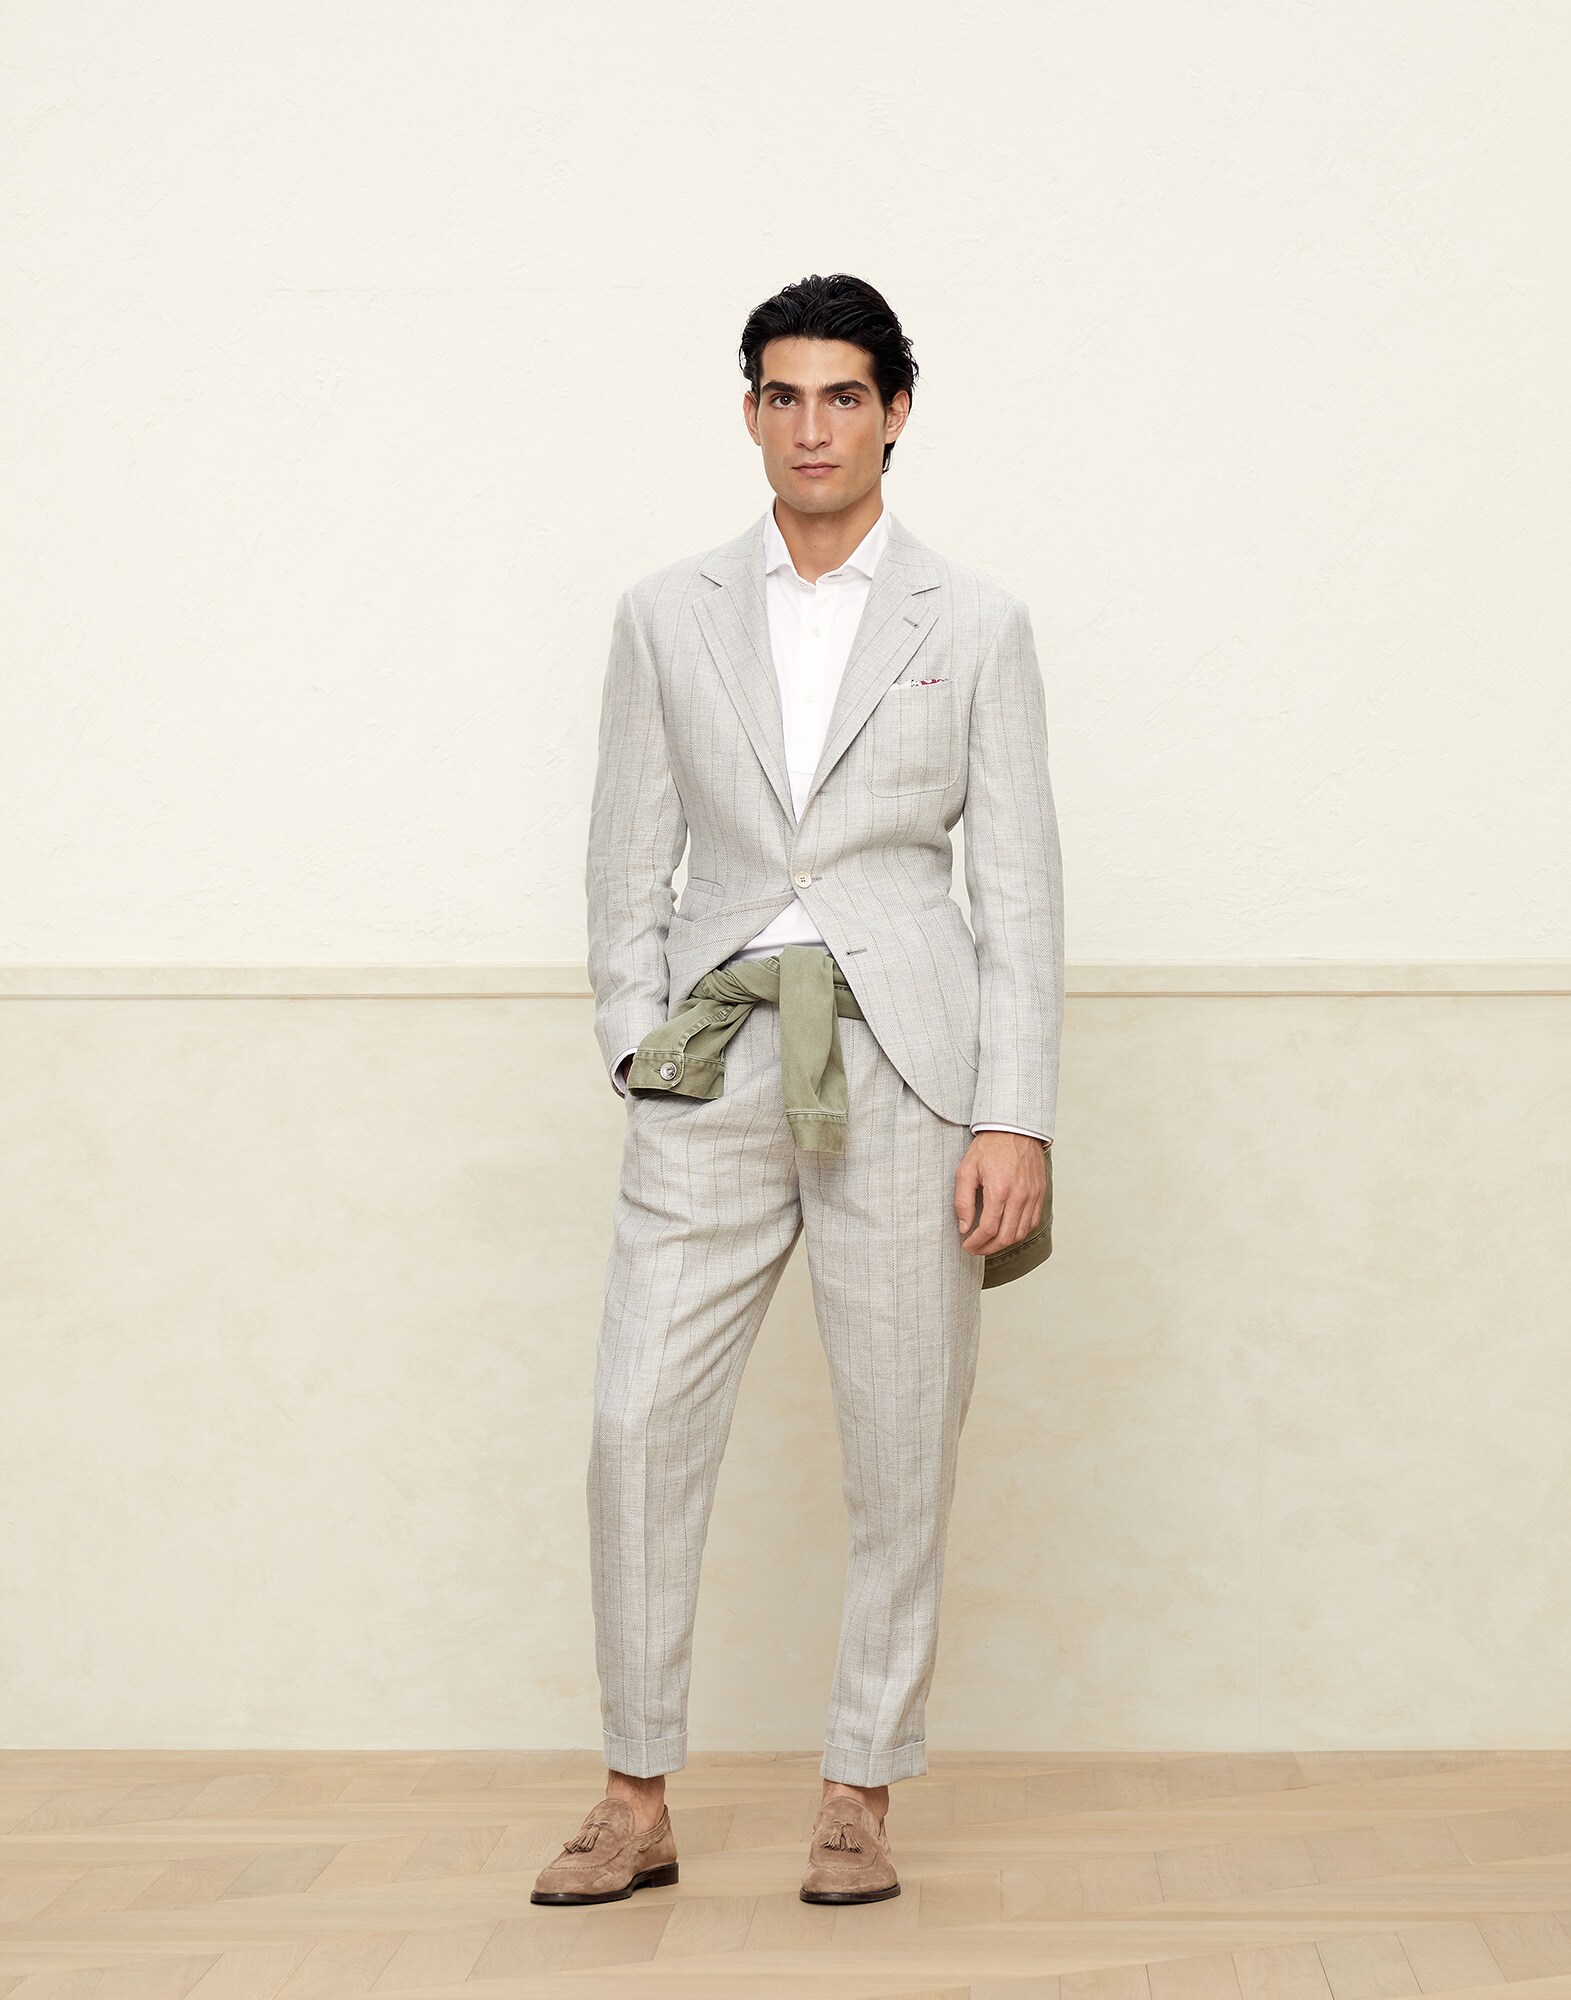 Men's leisure and elegant outfits | Shop the Look | Brunello Cucinelli